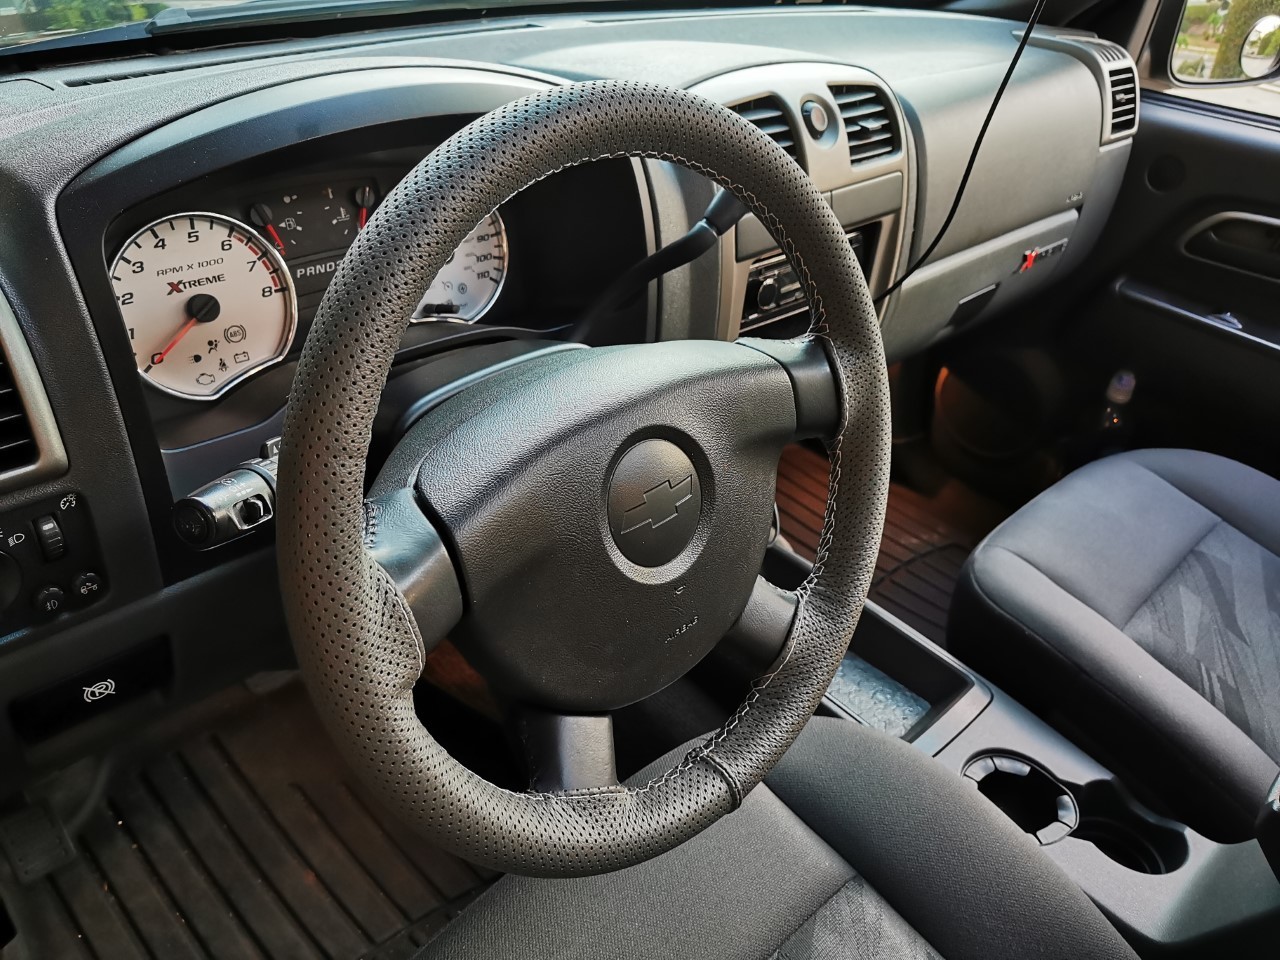 FITS MERCEDES GLE 17-19 GREY PERF LEATHER STEERING WHEEL COVER BLACK SEAM - $54.99